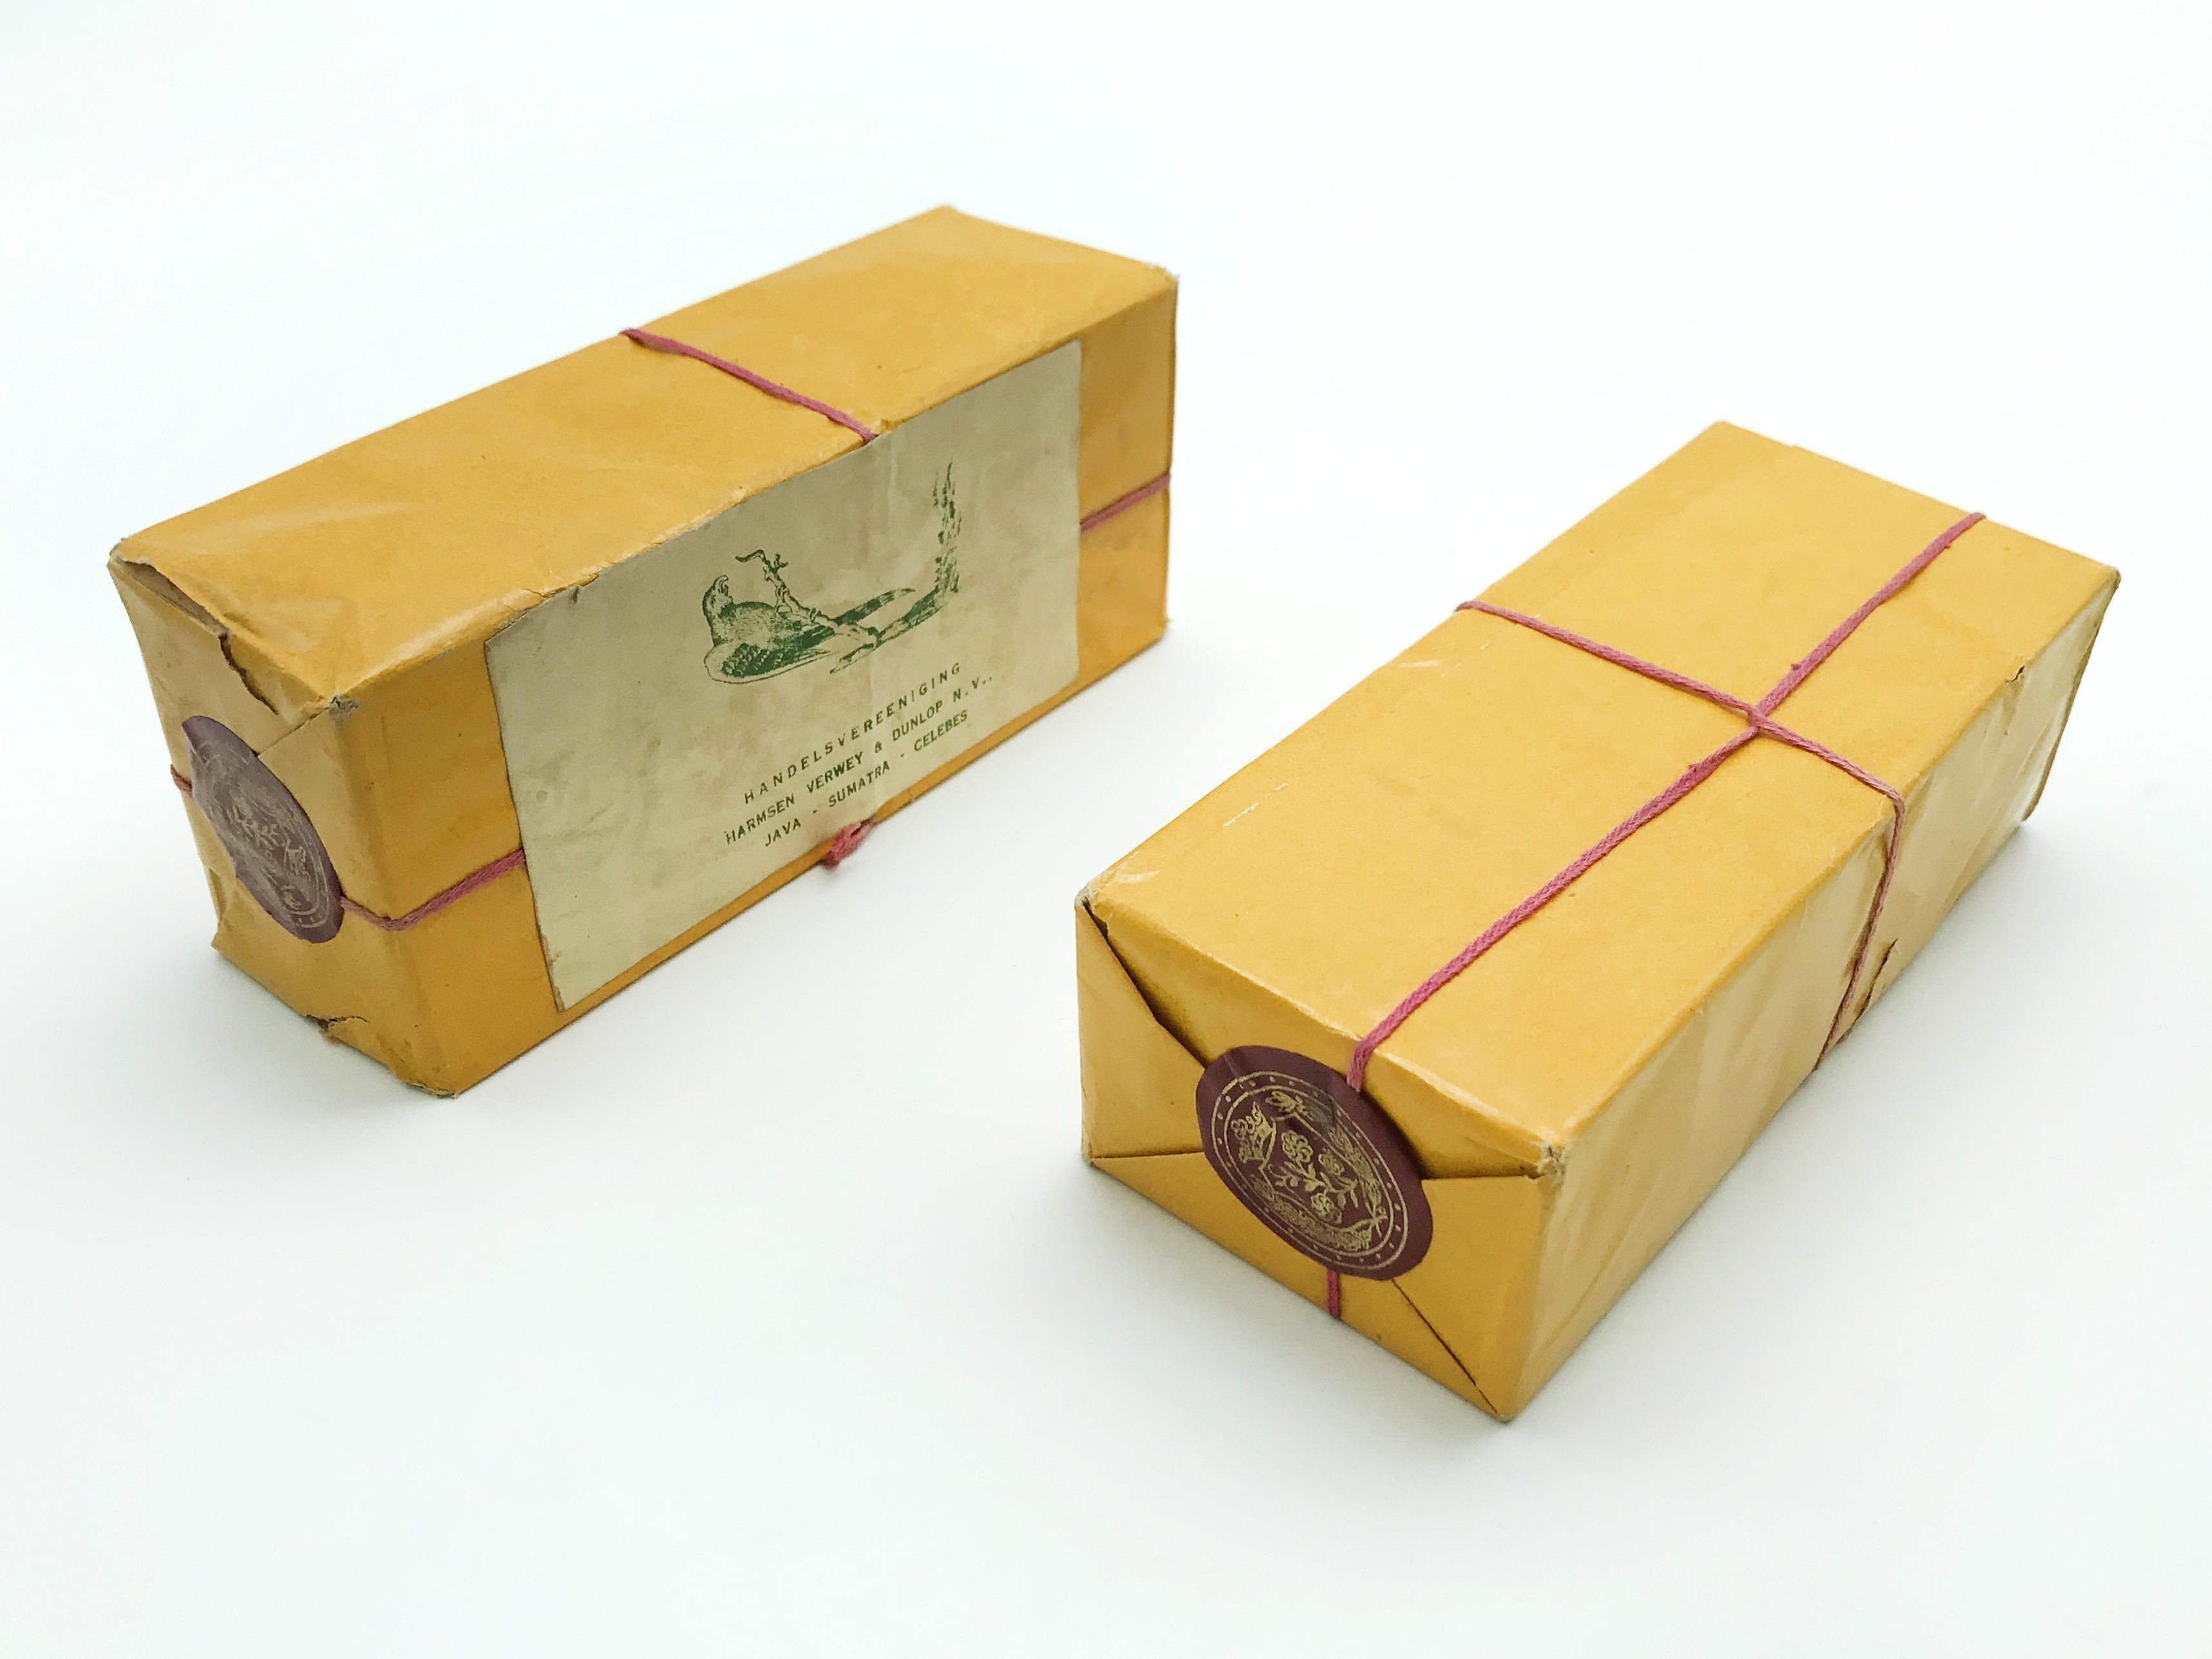 TWO BOXES OF TEN SETS EACH OF CHINESE “CHI CHI PAI” PLAYING CARDS - Image 2 of 15